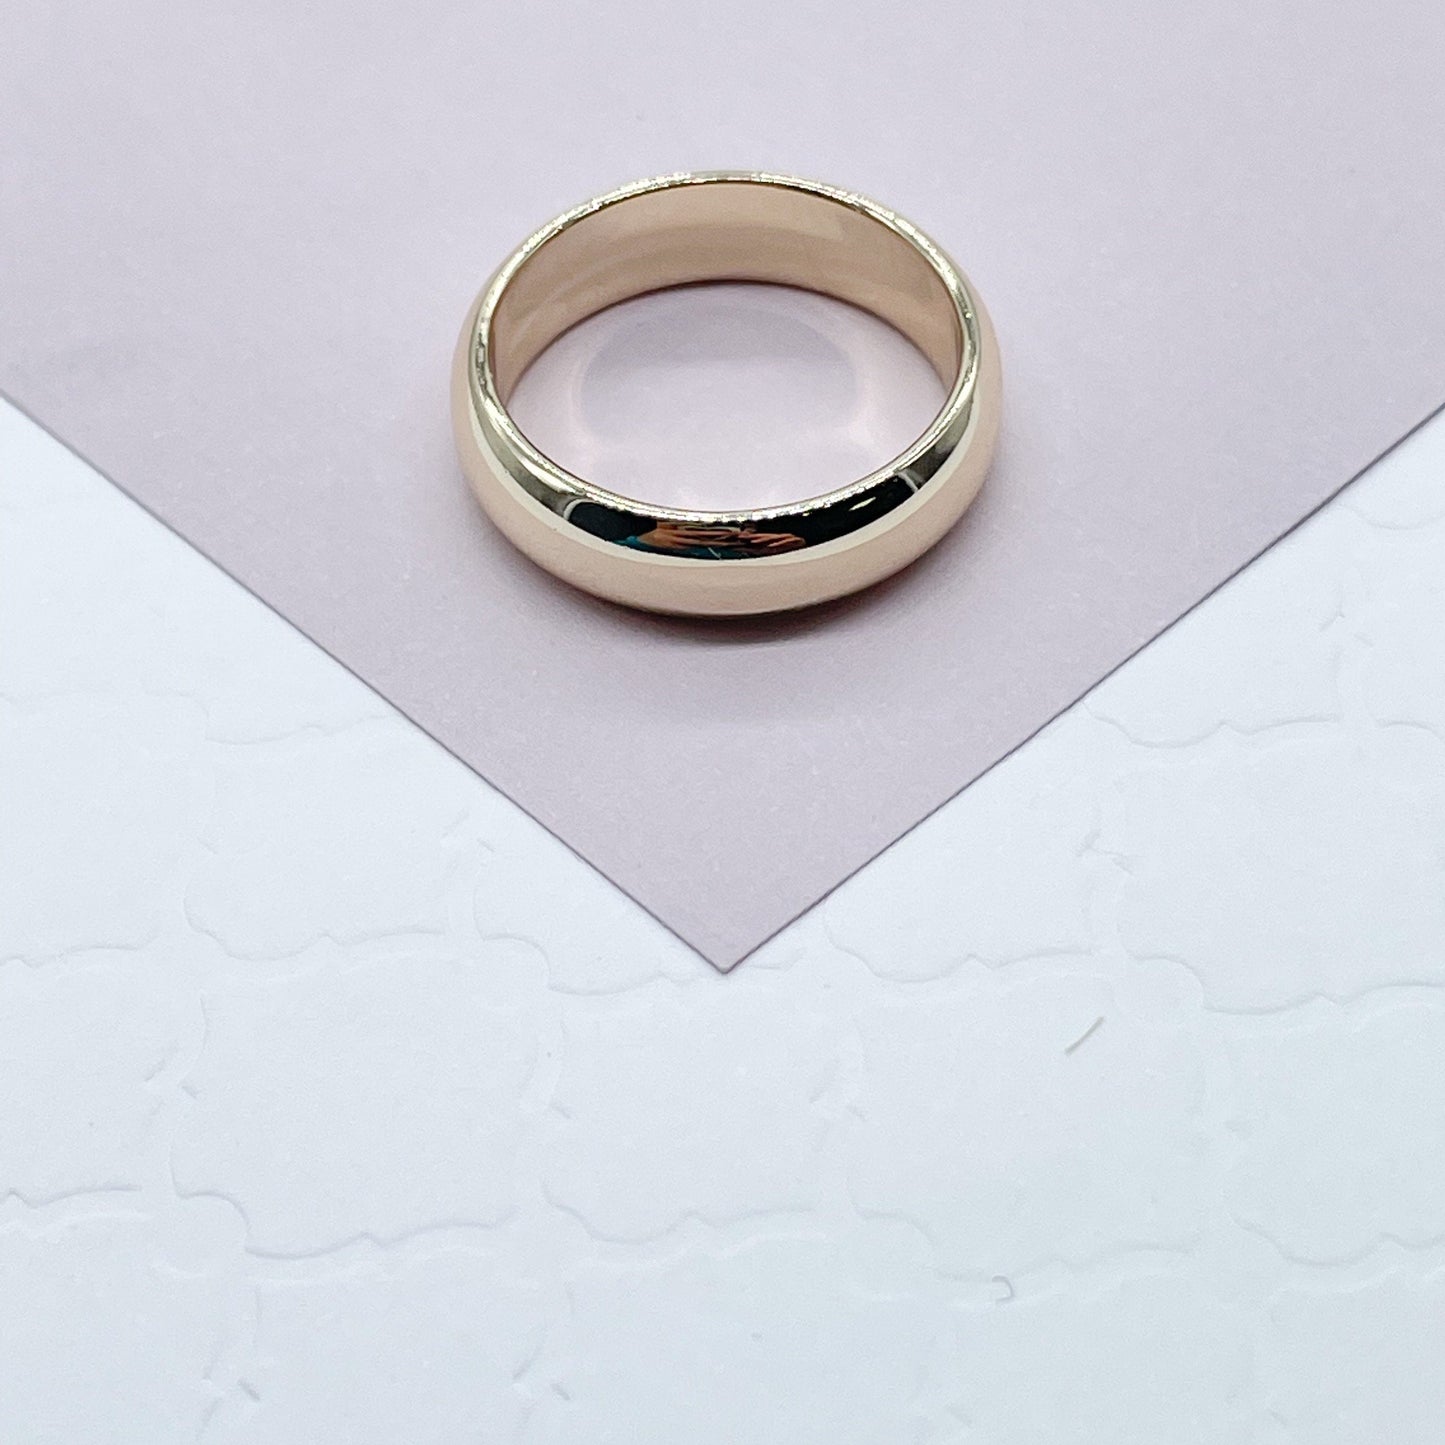 18K Gold Filled Plain Ring, Engagement Band Ring,   Dainty Jewelry